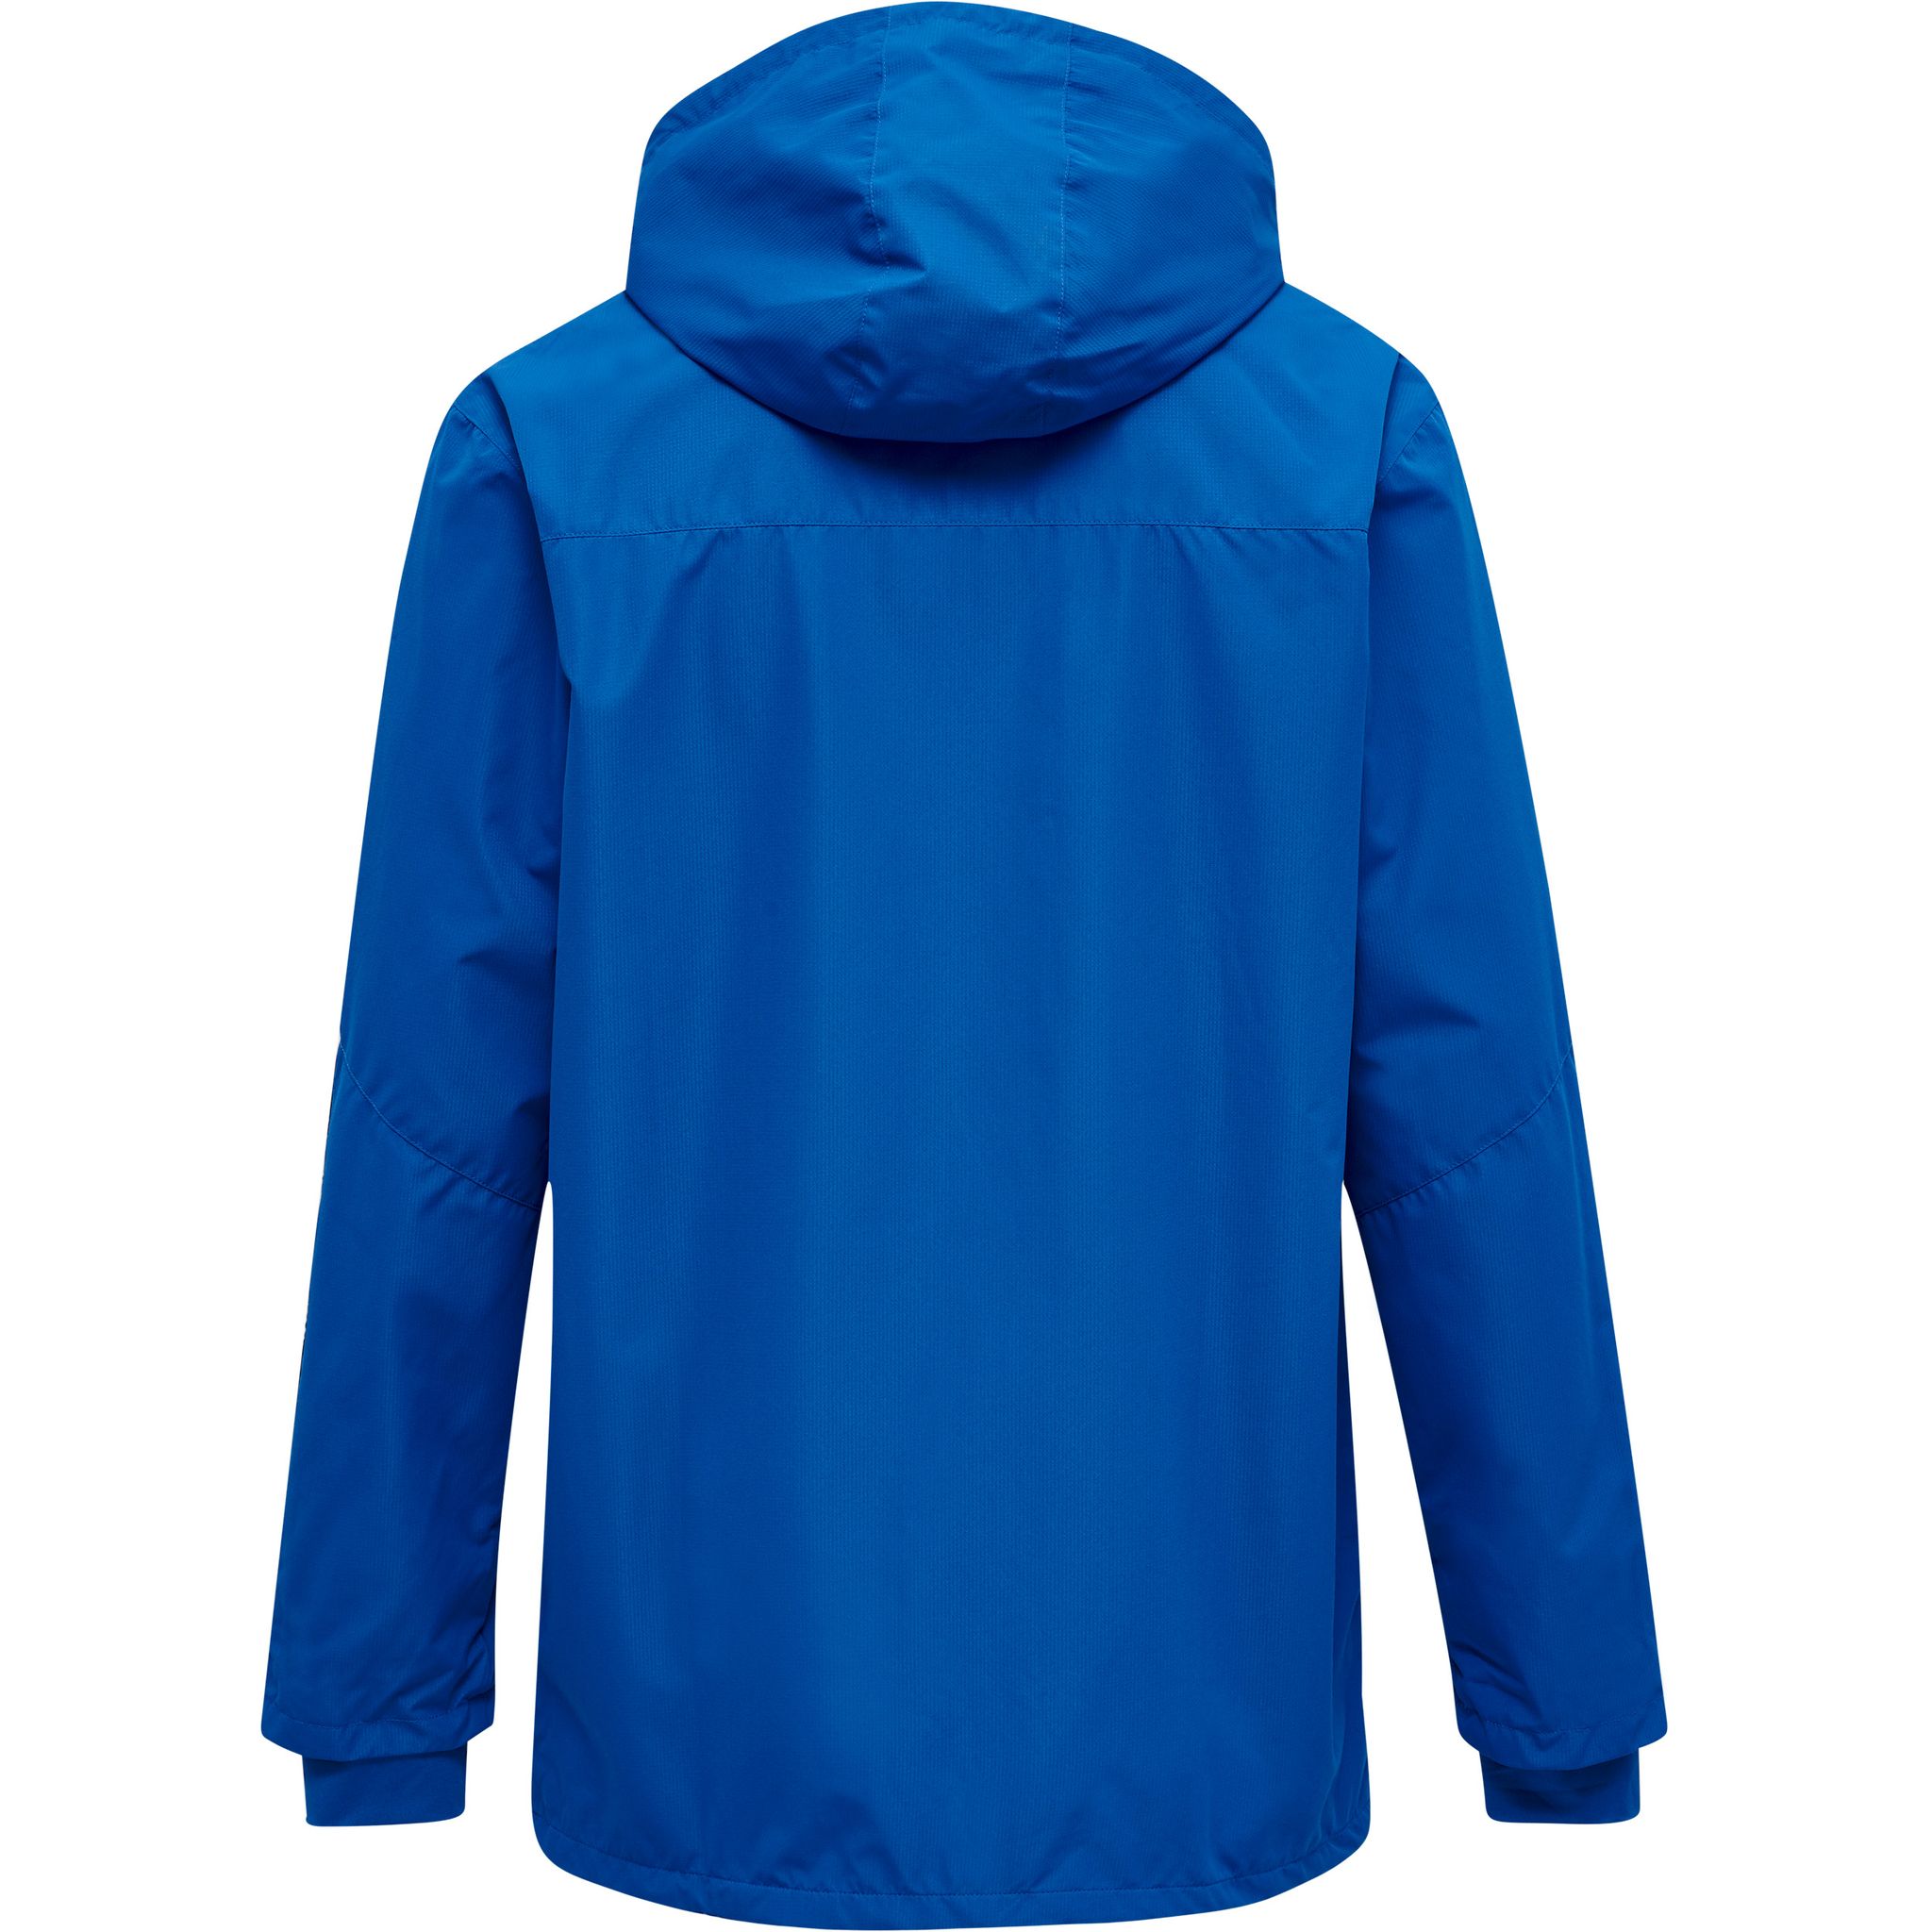 hmlAUTHENTIC KIDS ALL-WEATHER JACKET